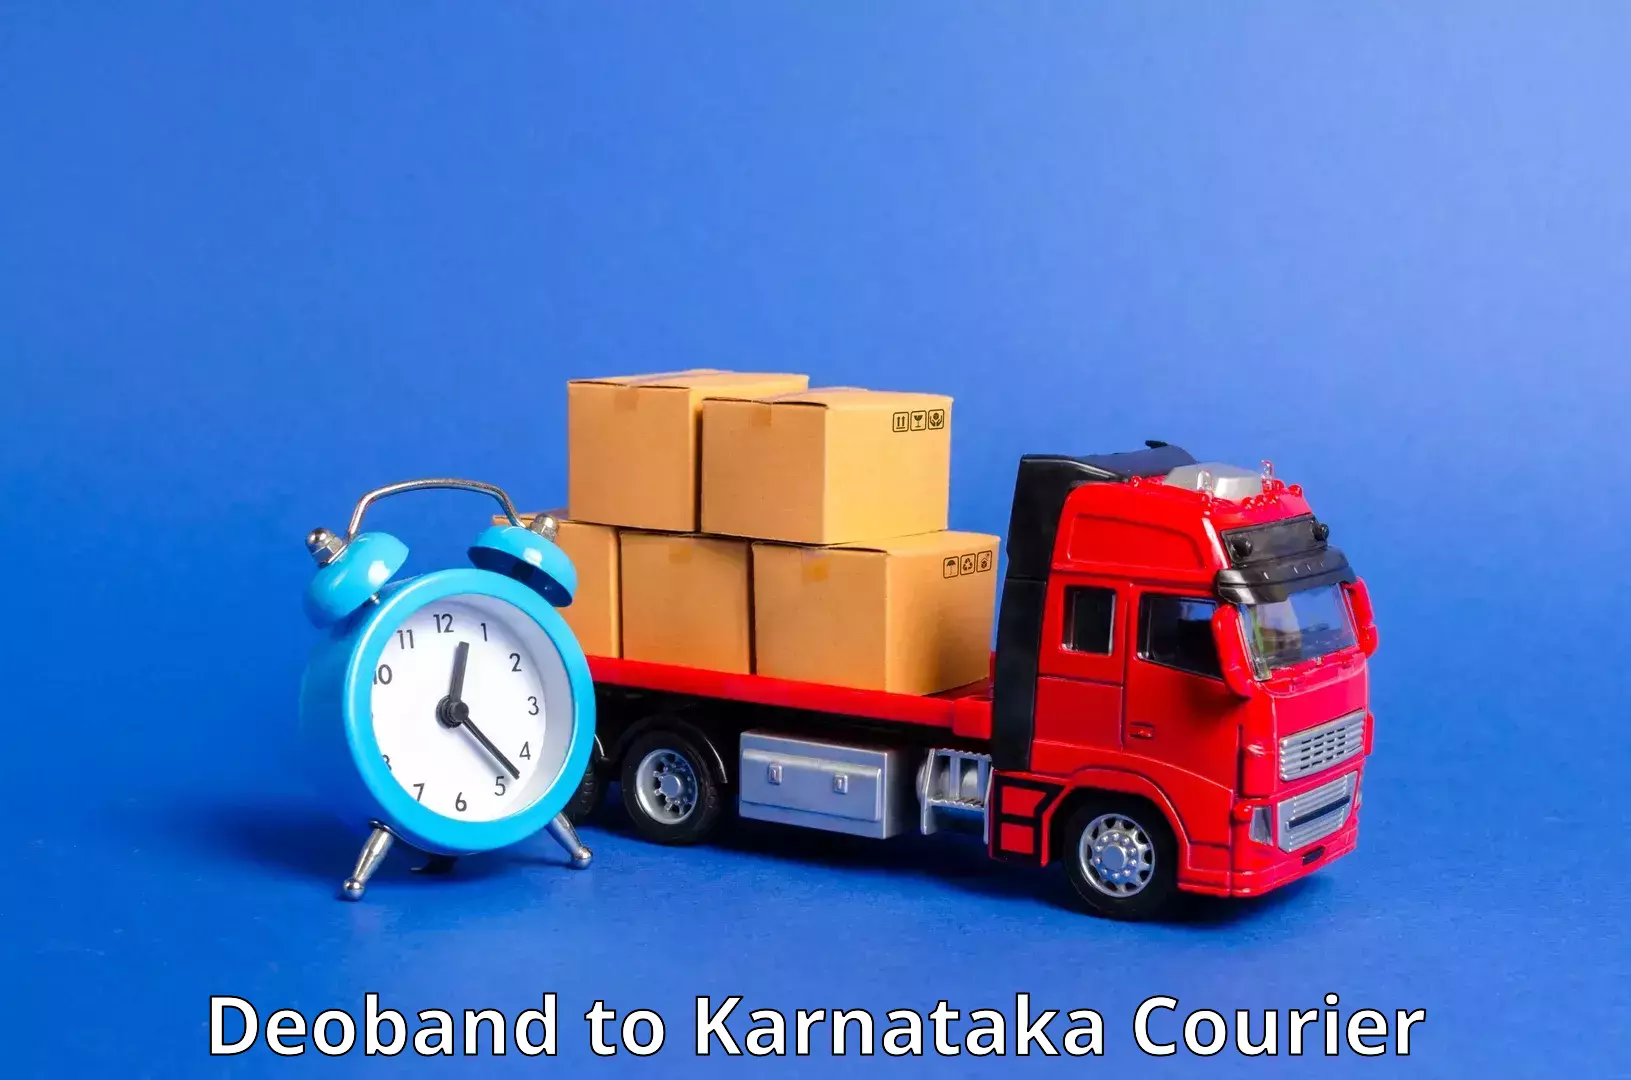 High-speed parcel service Deoband to Mangalore Port